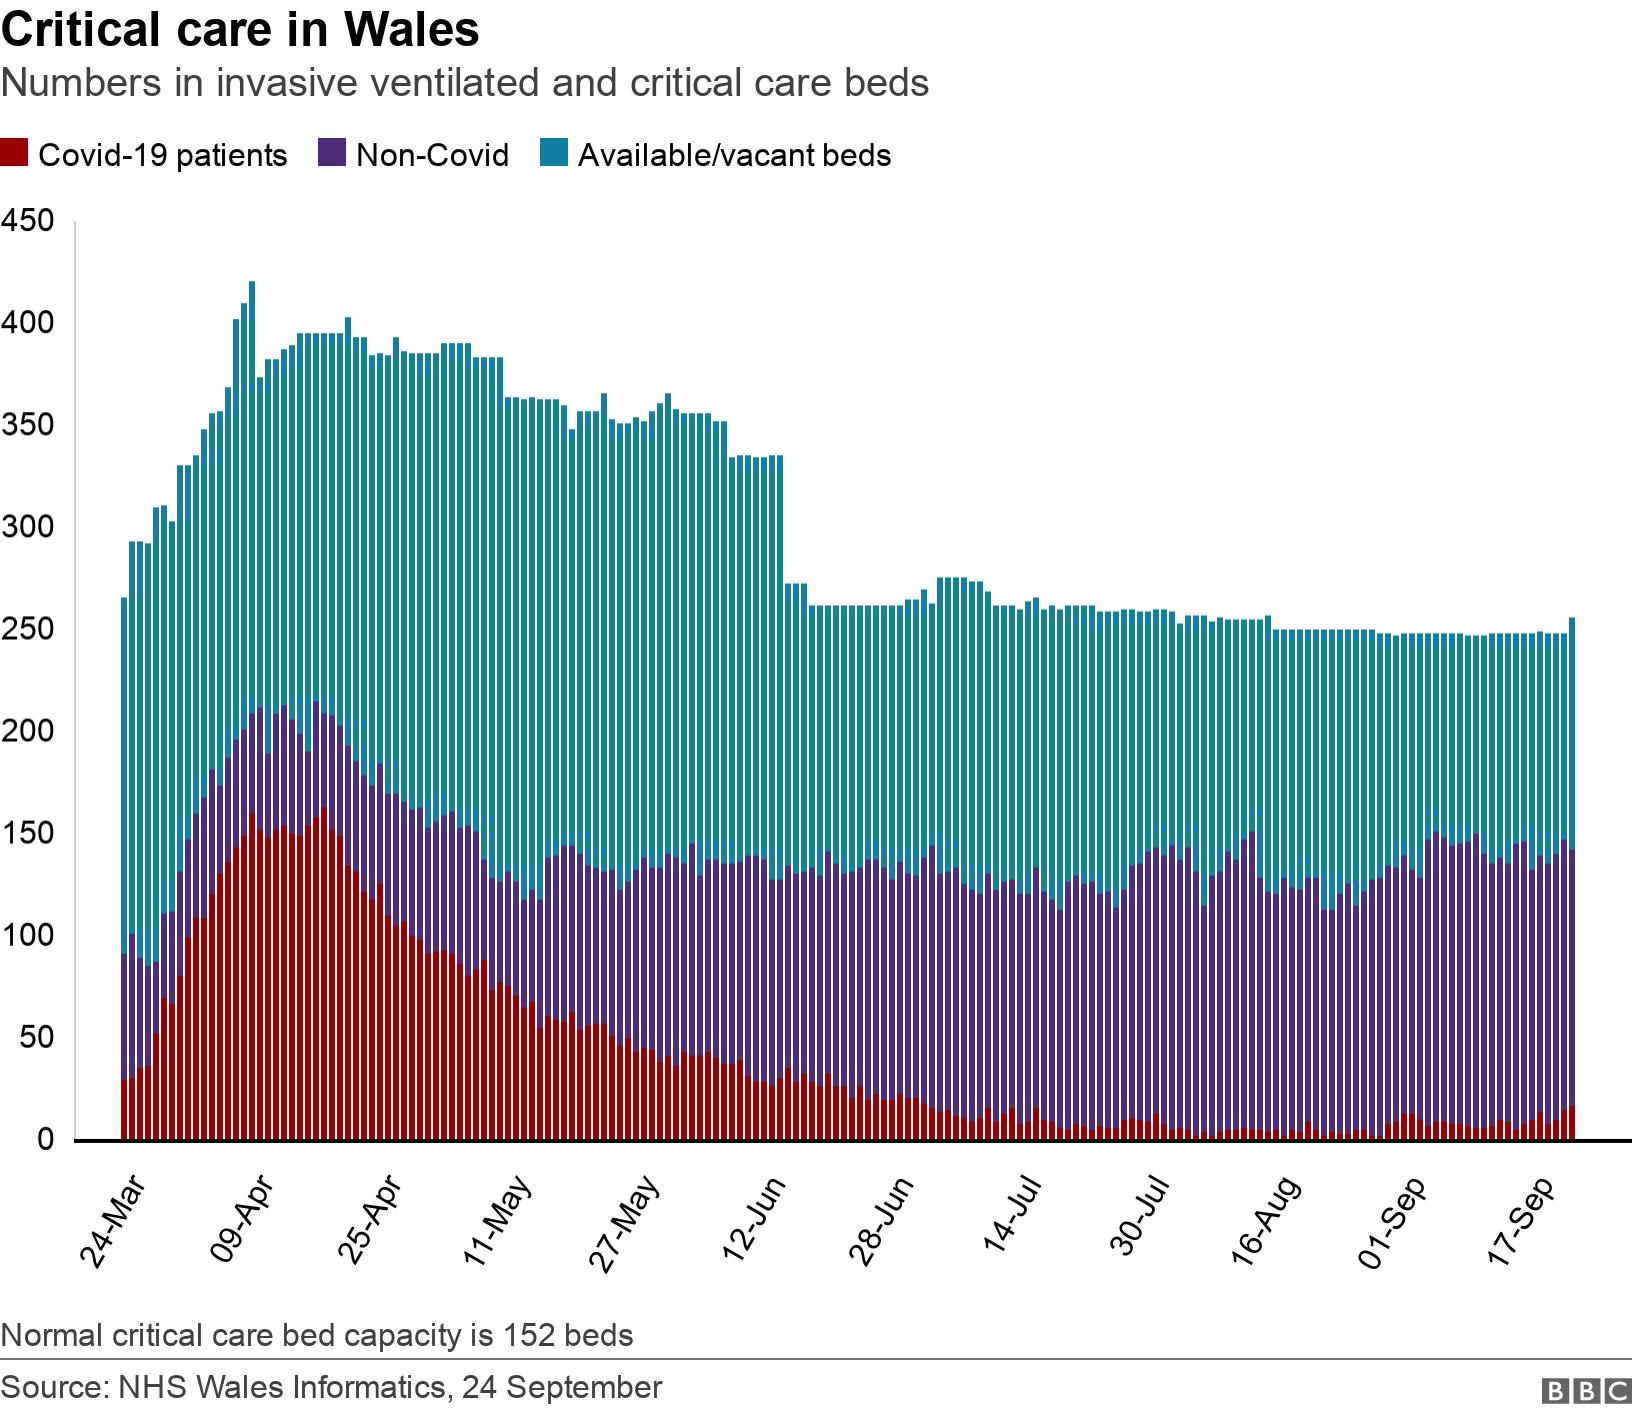 Critical care in Wales. Numbers in invasive ventilated and critical care beds.  Normal critical care bed capacity is 152 beds.